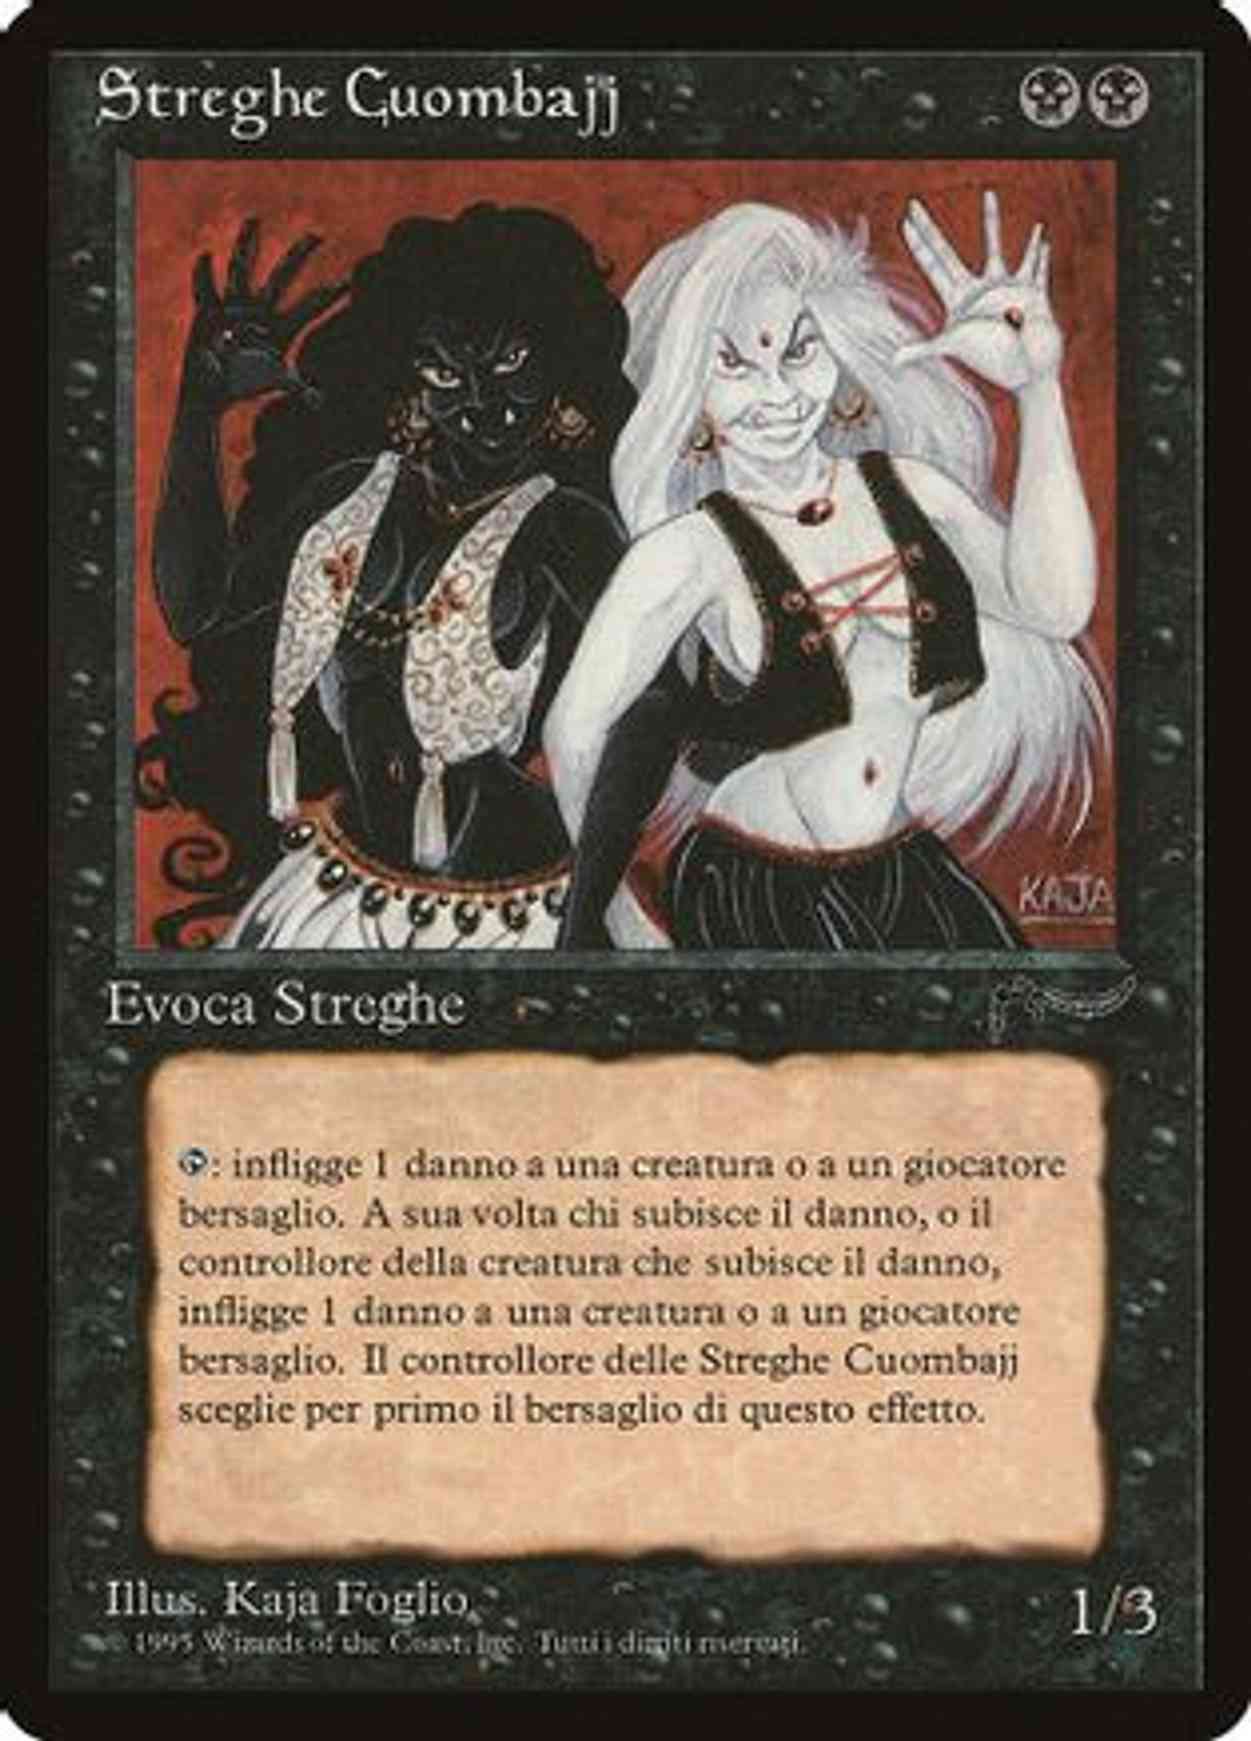 Cuombajj Witches (Italian) - "Streghe Cuomabajj" magic card front